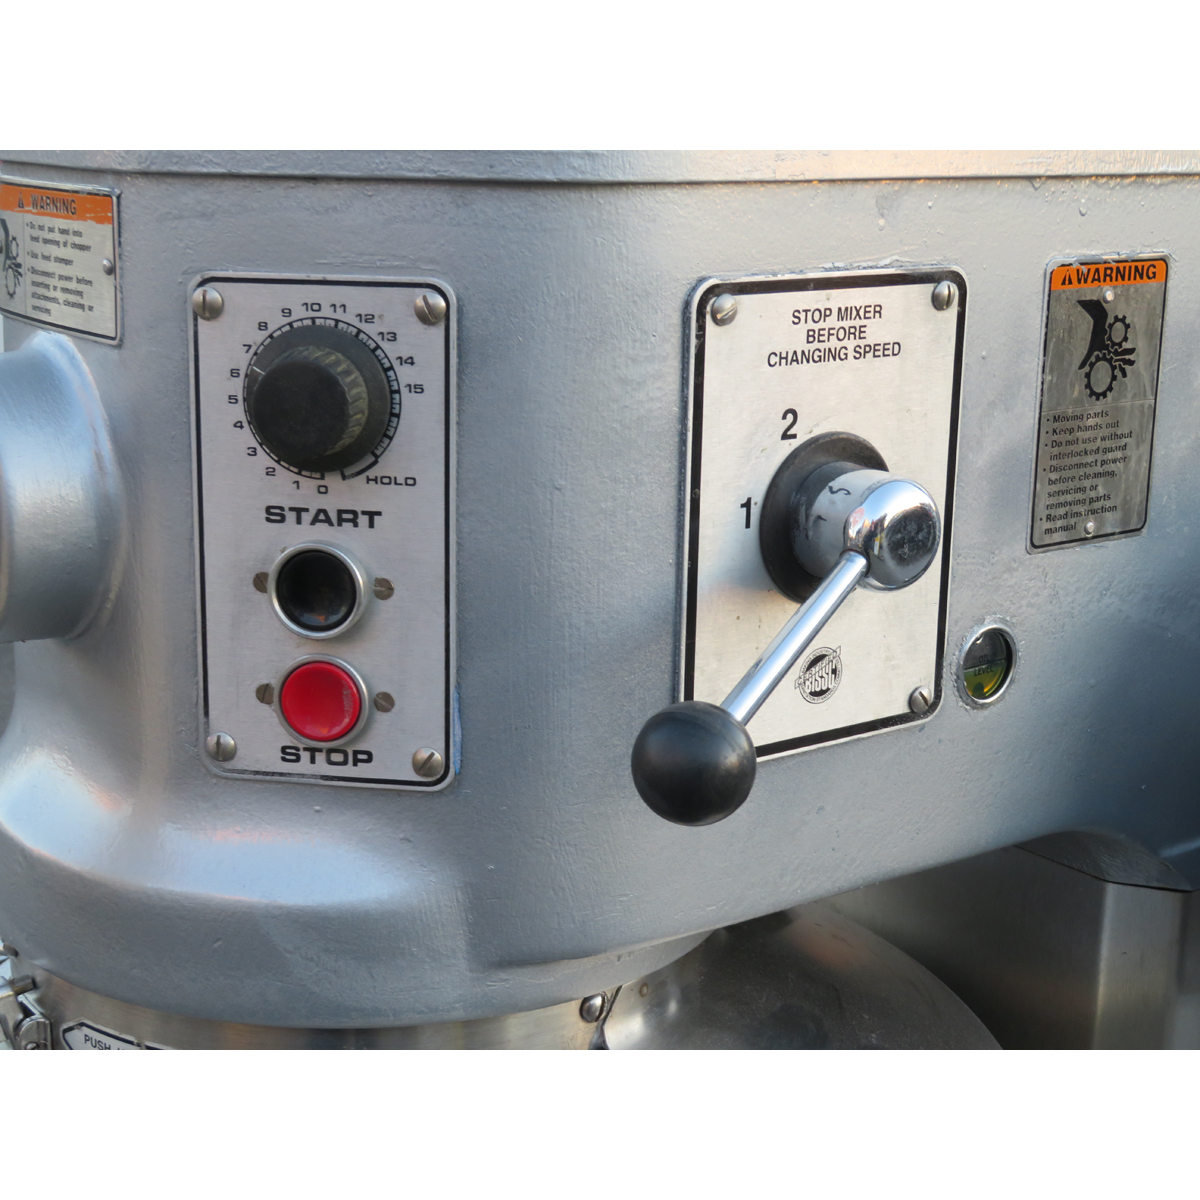 Hobart 60 Quart P660 Pizza Mixer, Used Great Condition image 1